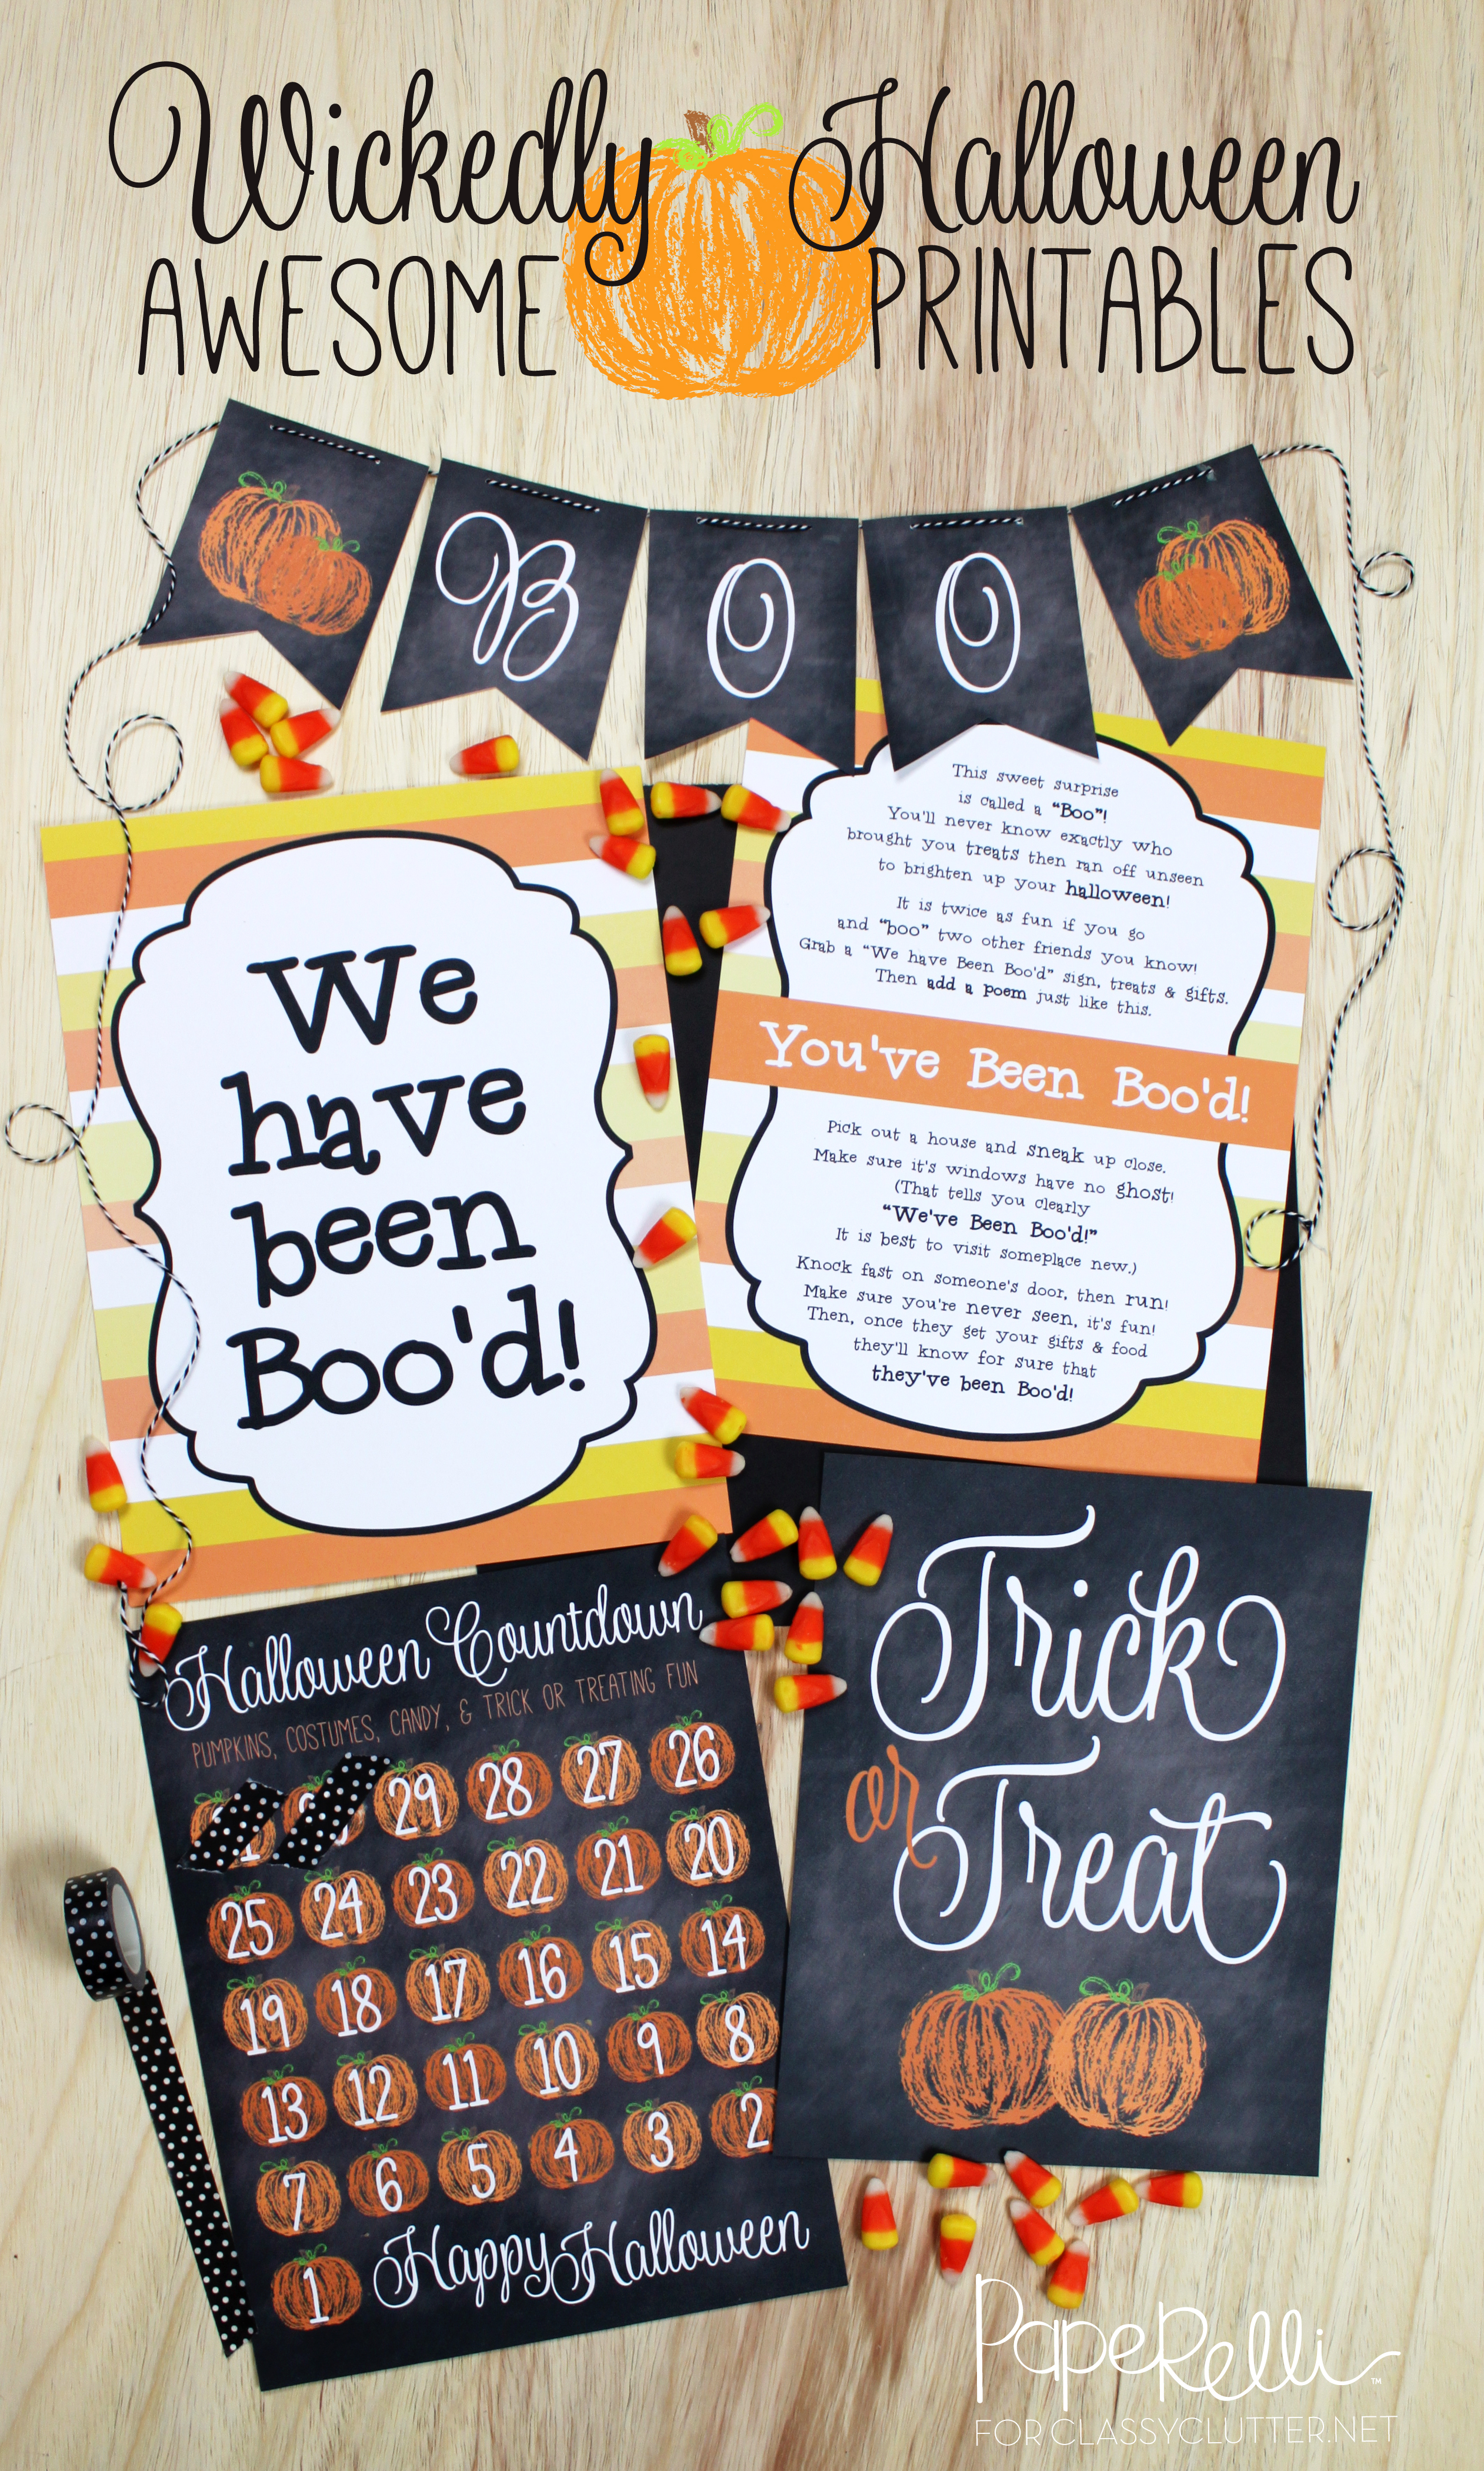 Wickedly Awesome Halloween Printables